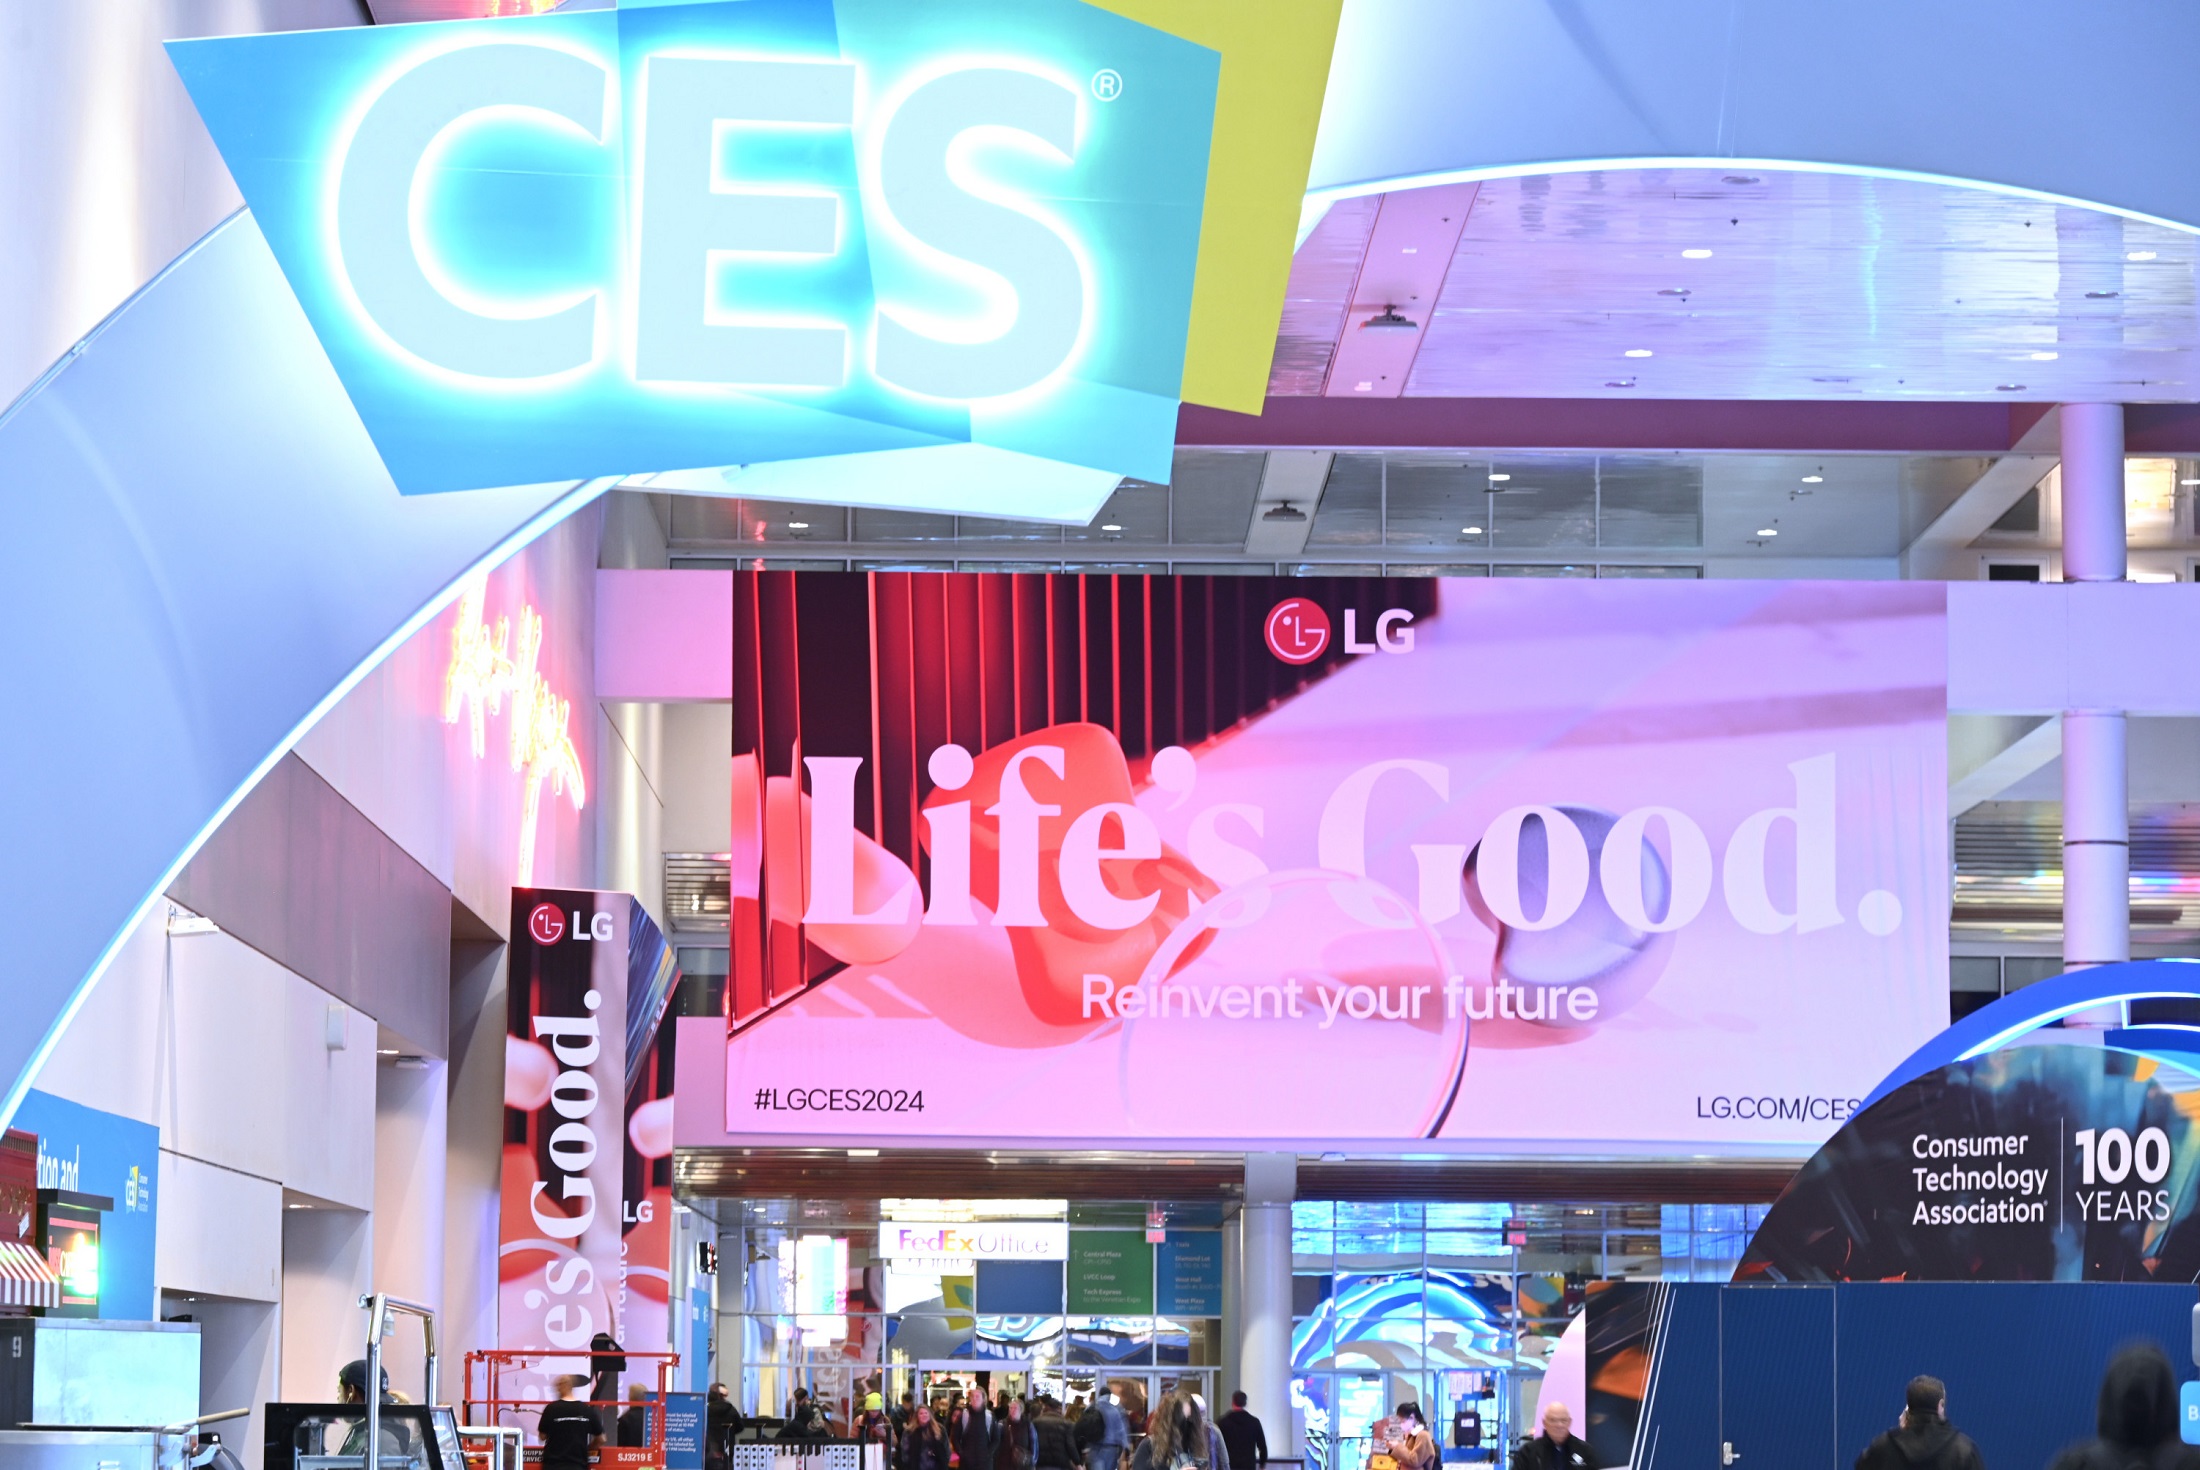 A photo of the LG poster at the CES 2024 venue